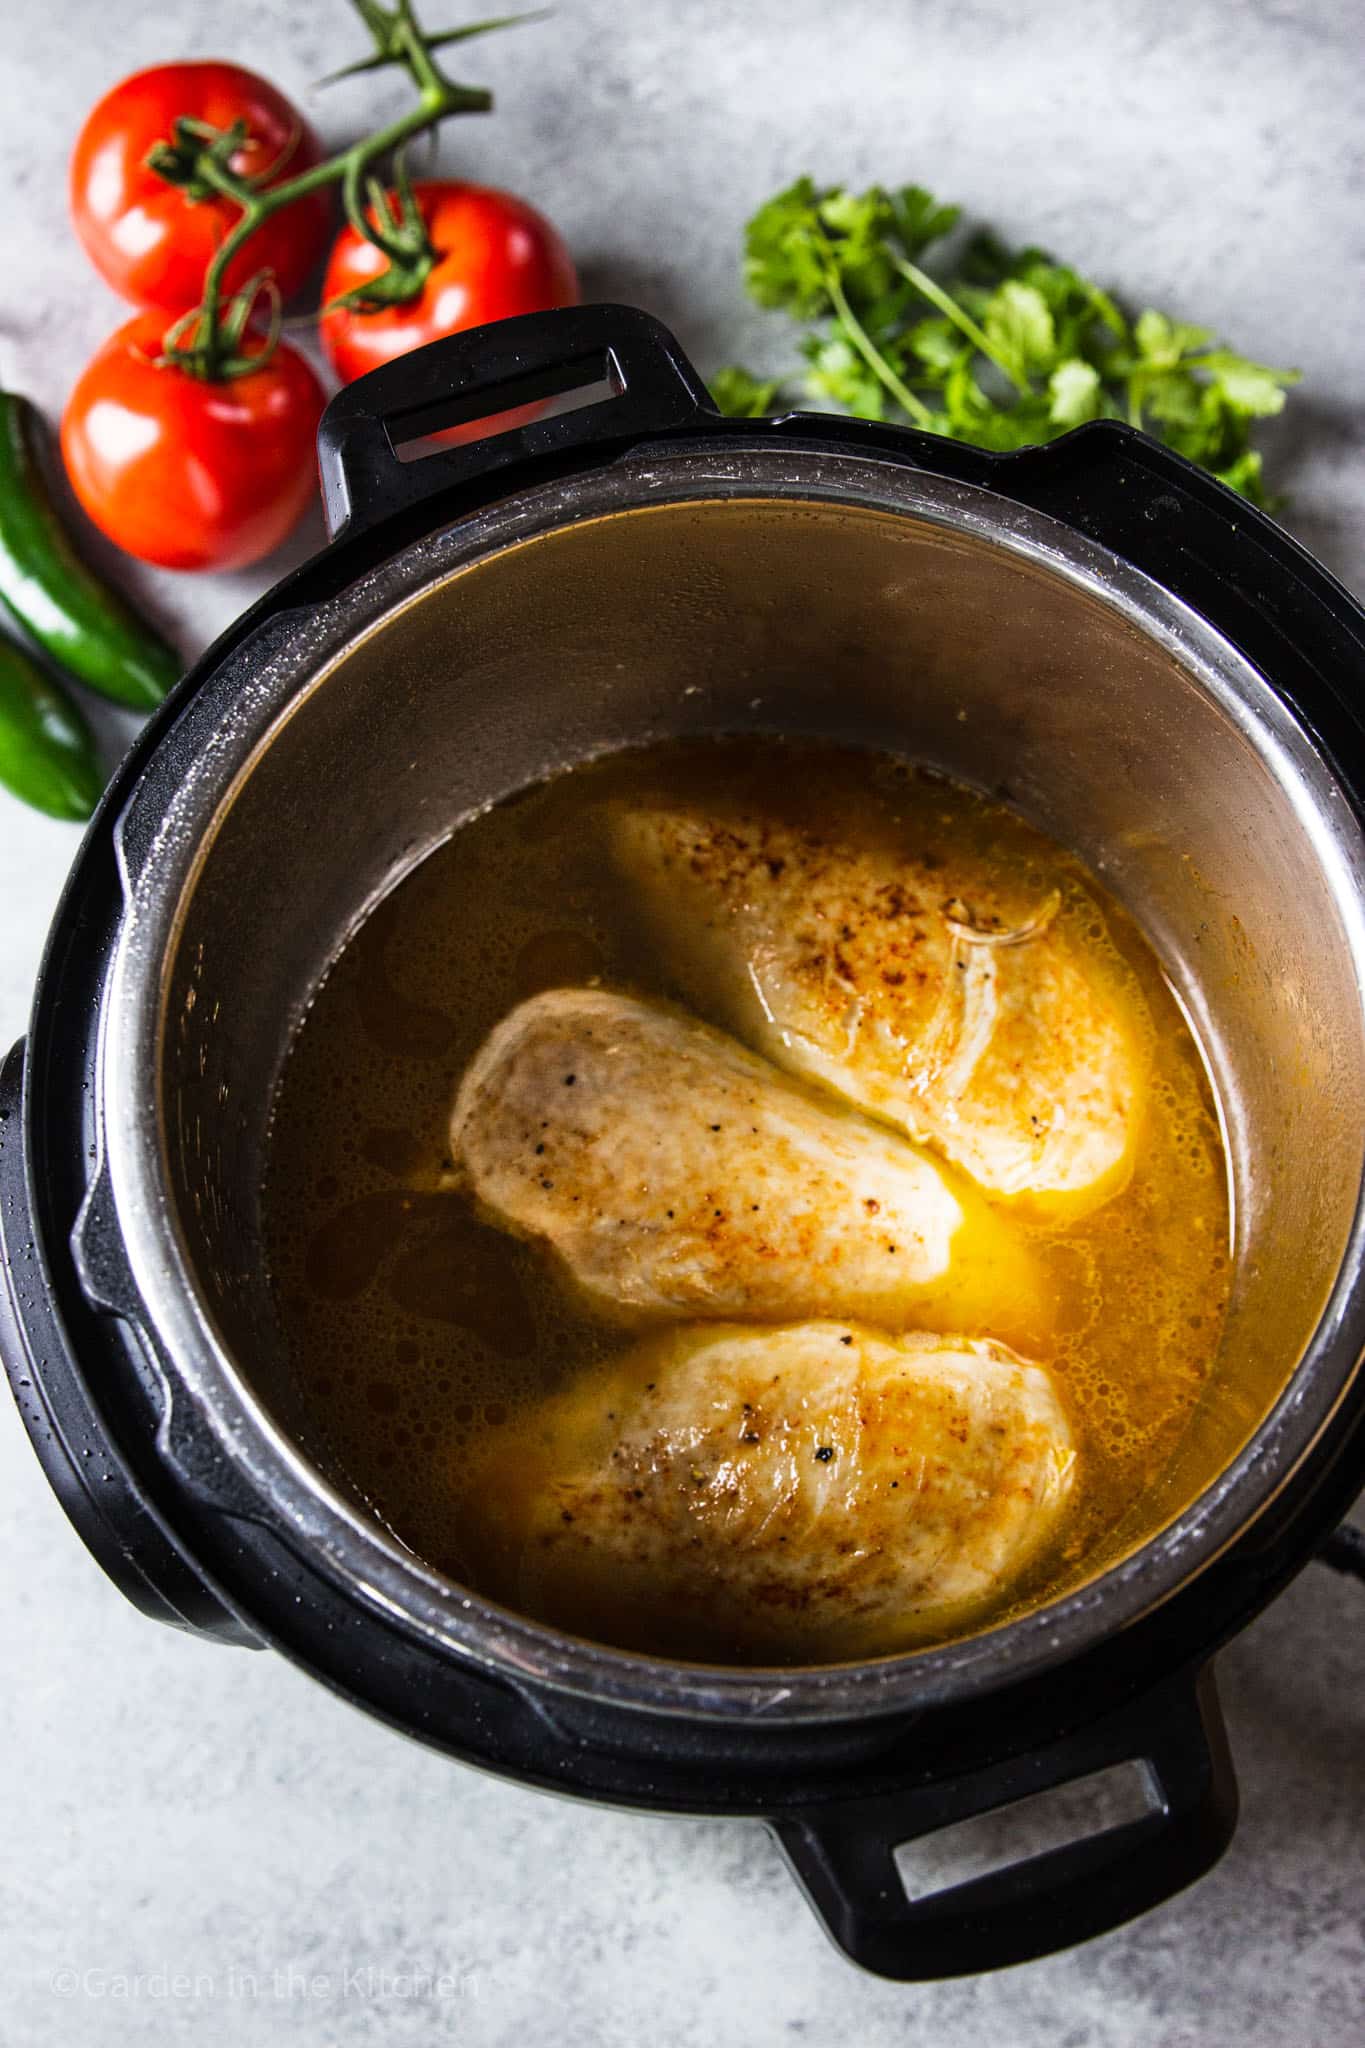 3 chicken breasts and chicken broth in an Instant Pot.